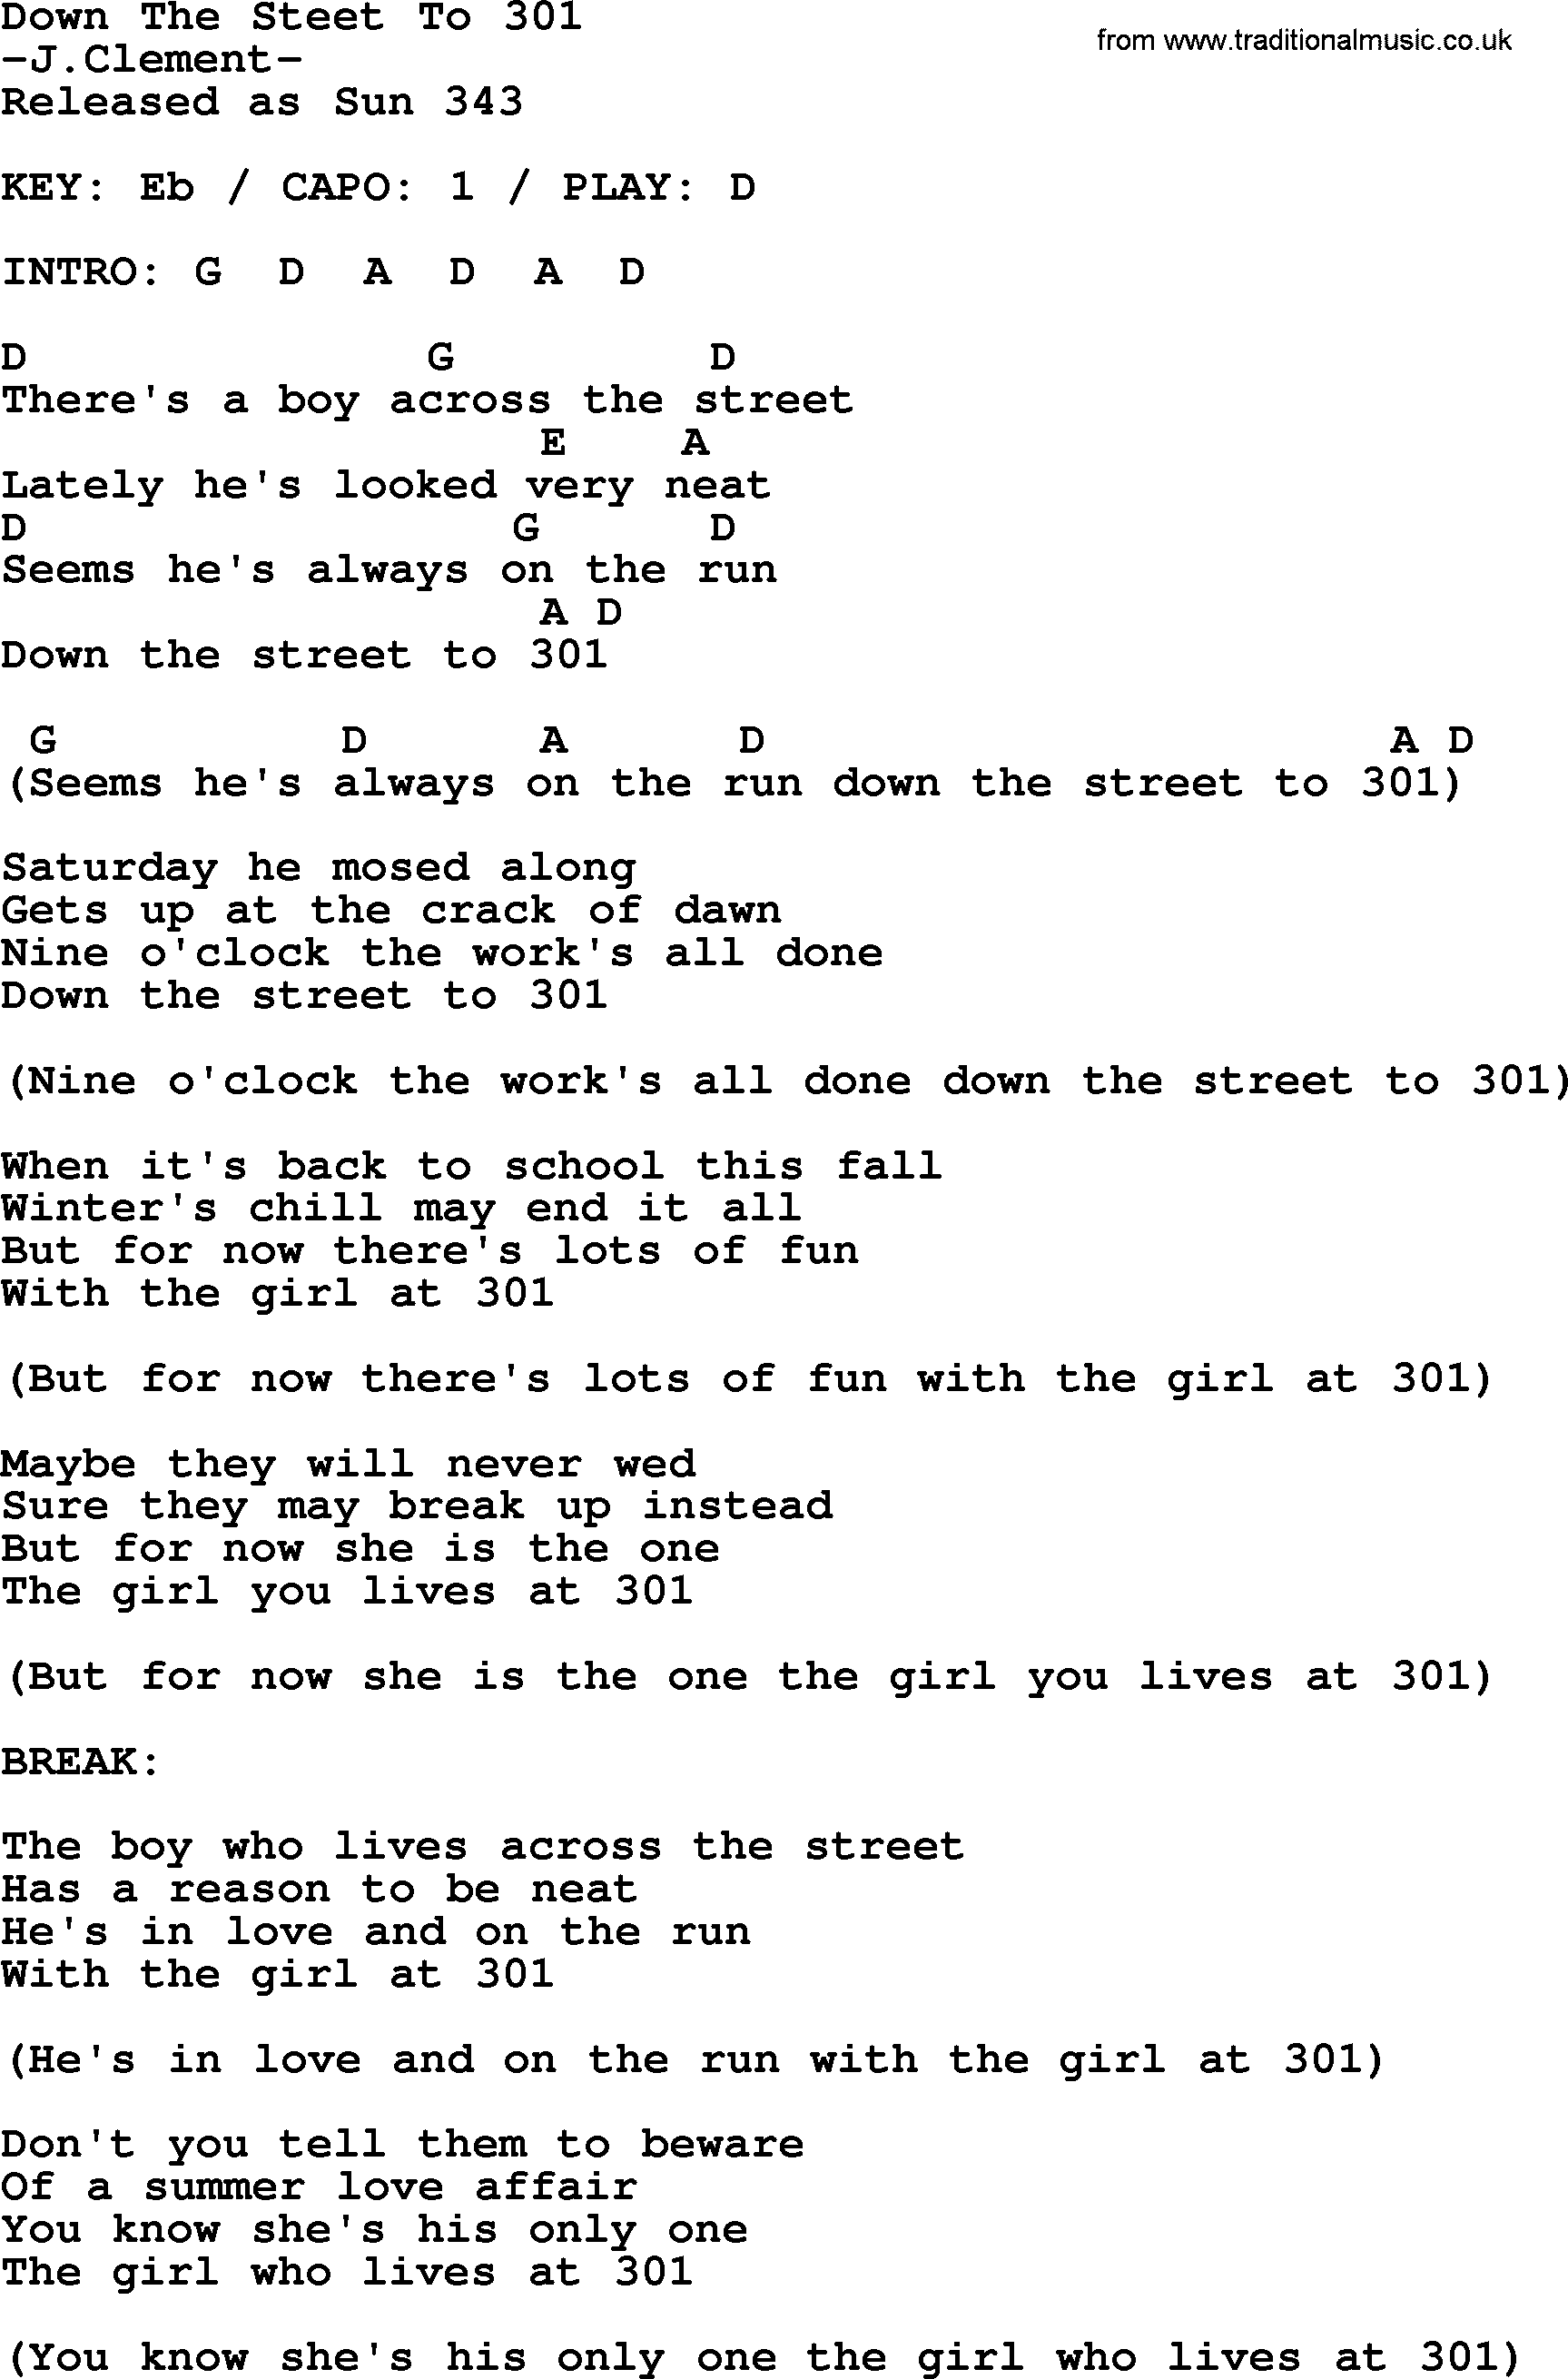 Johnny Cash song Down The Steet To 301, lyrics and chords